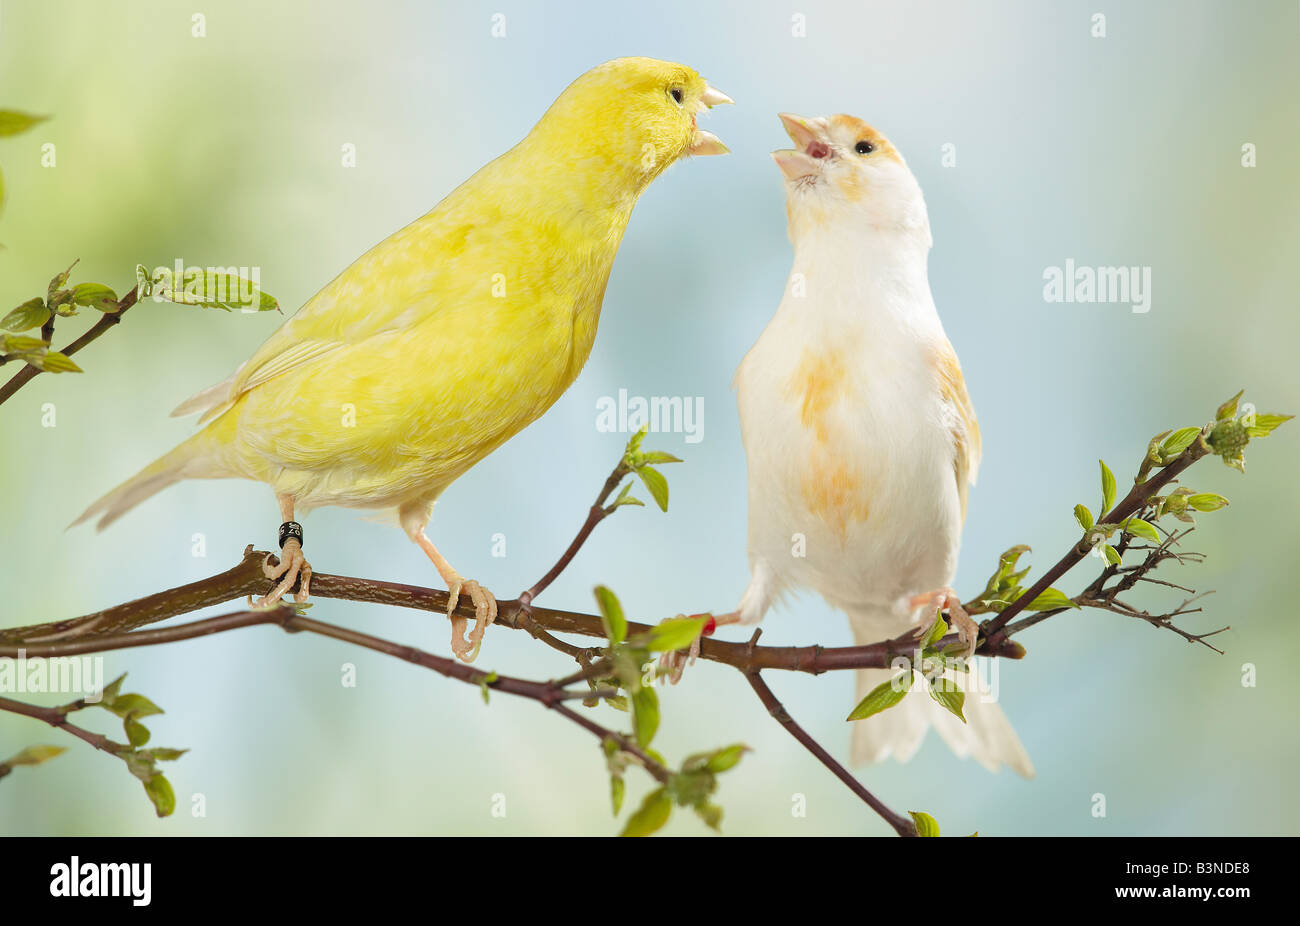 Canary (Serinus canaria forma domestica). Two birds squabbling on a twig Stock Photo